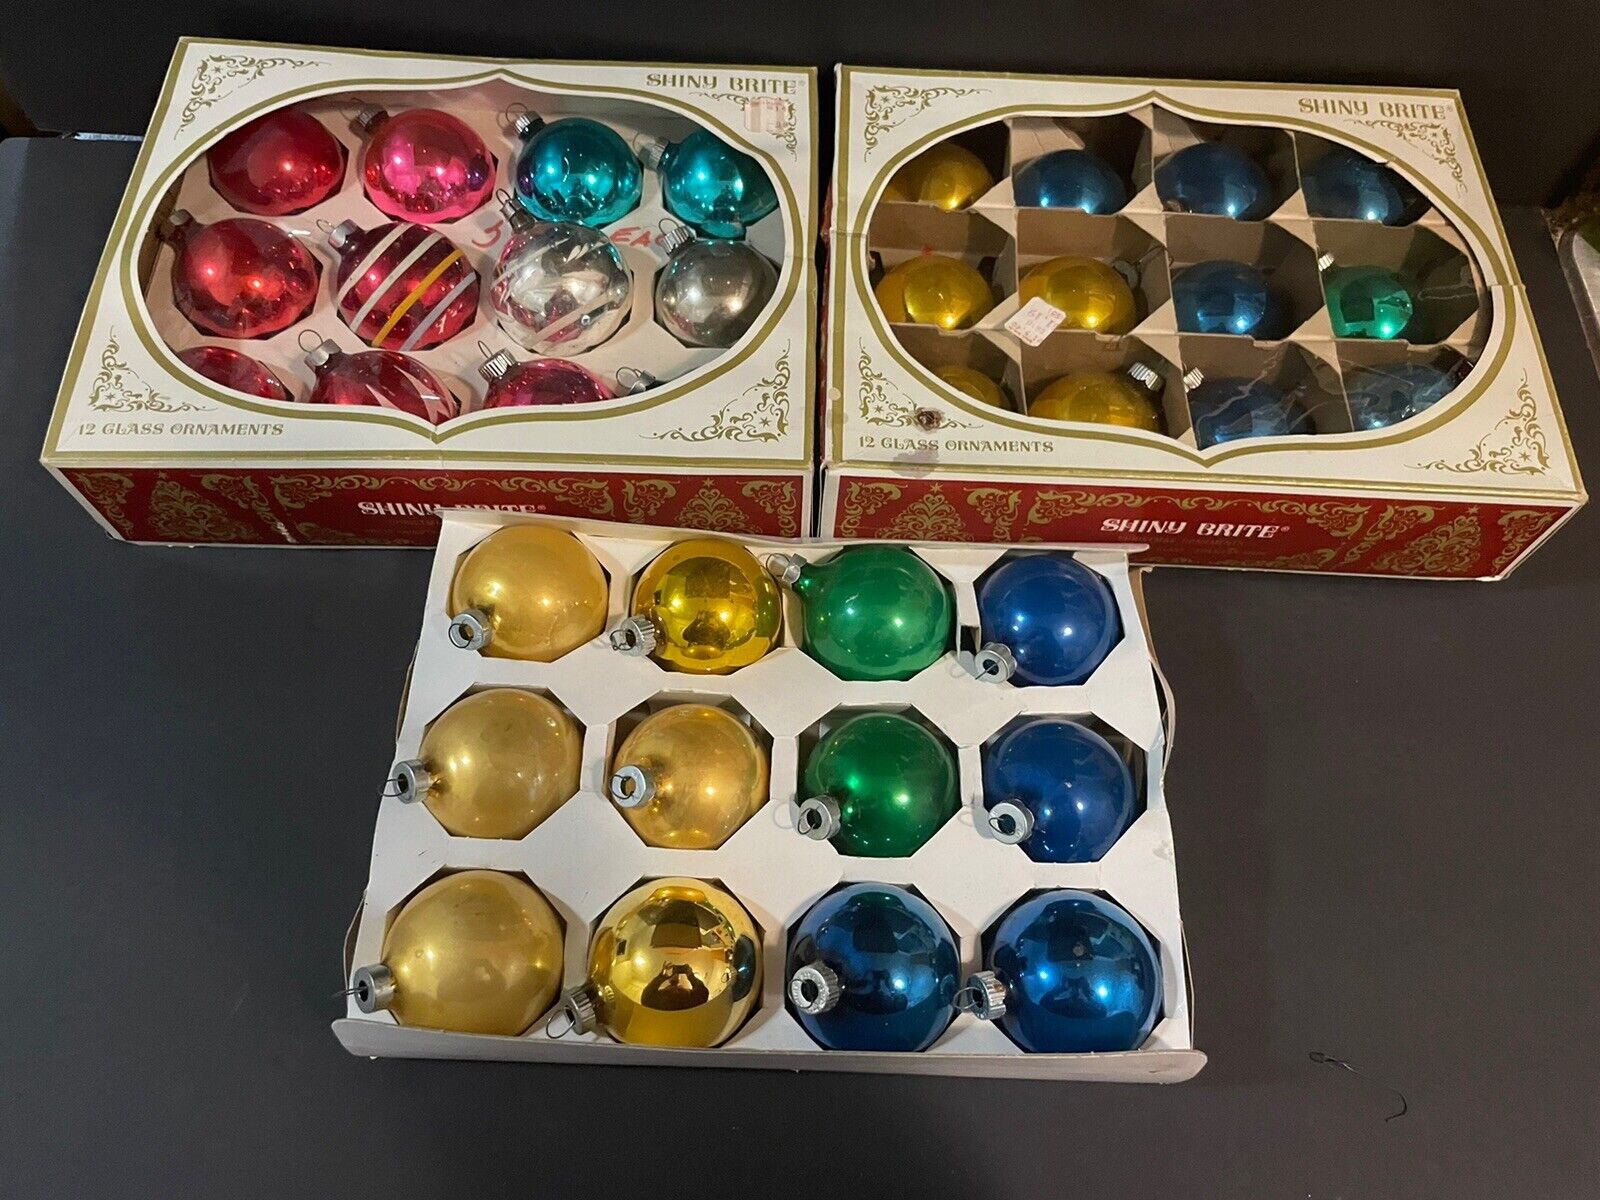 Retro Vintage Shiny Brite Ornaments - 24 36 Ornaments In Varying Colors